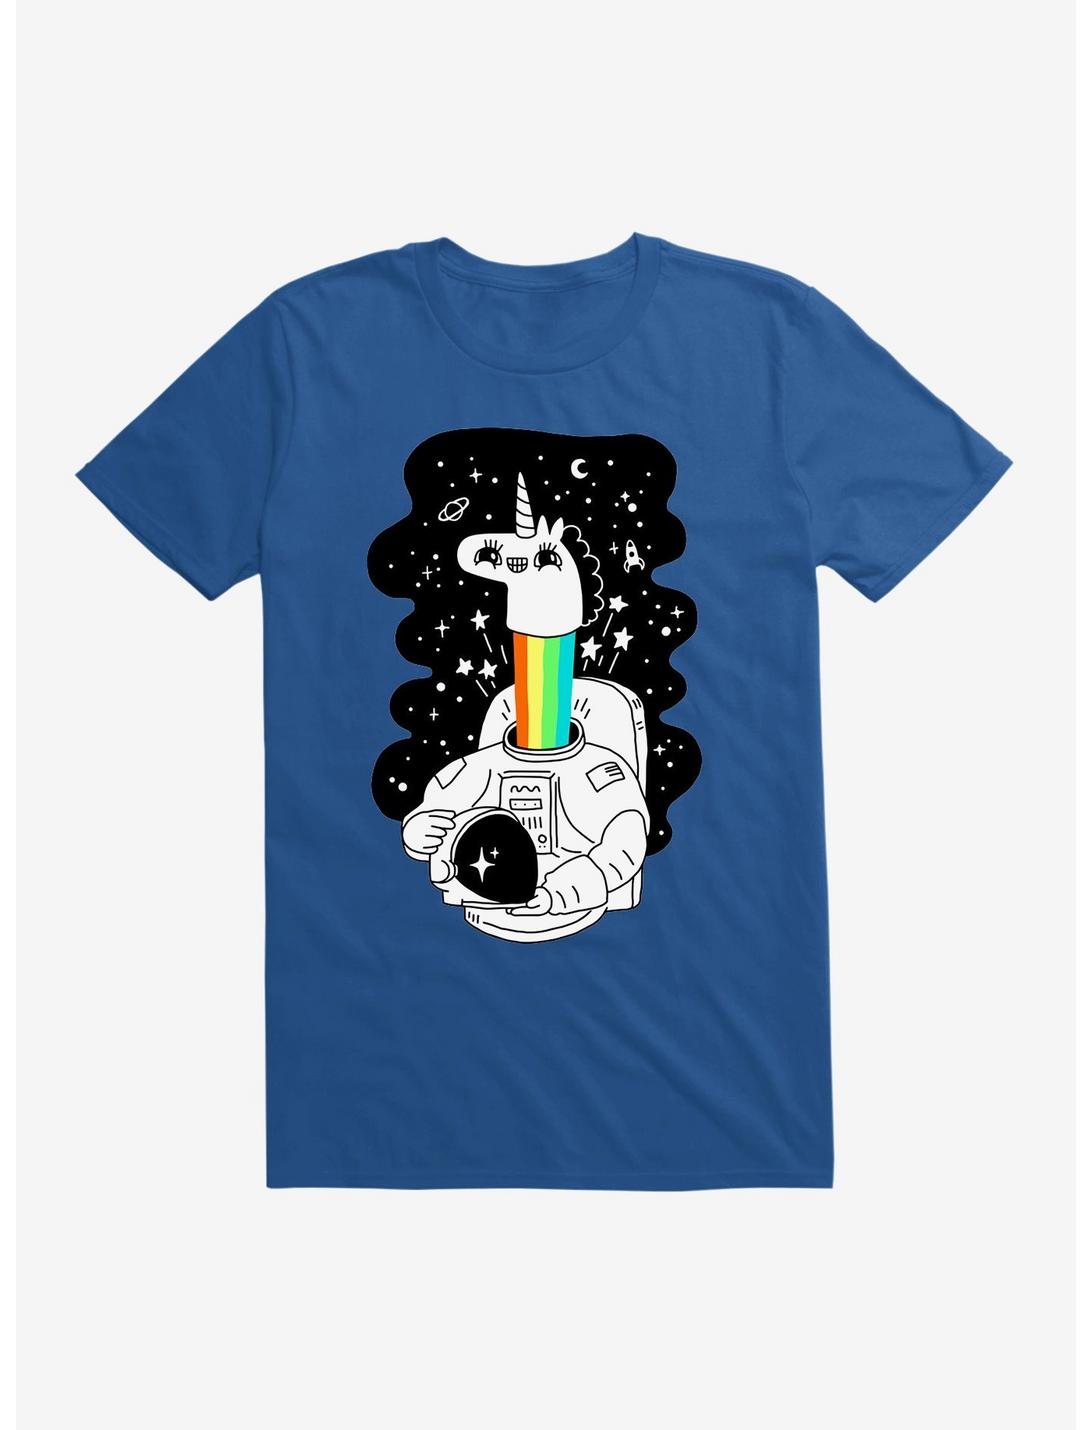 See You In Space! T-Shirt, ROYAL, hi-res